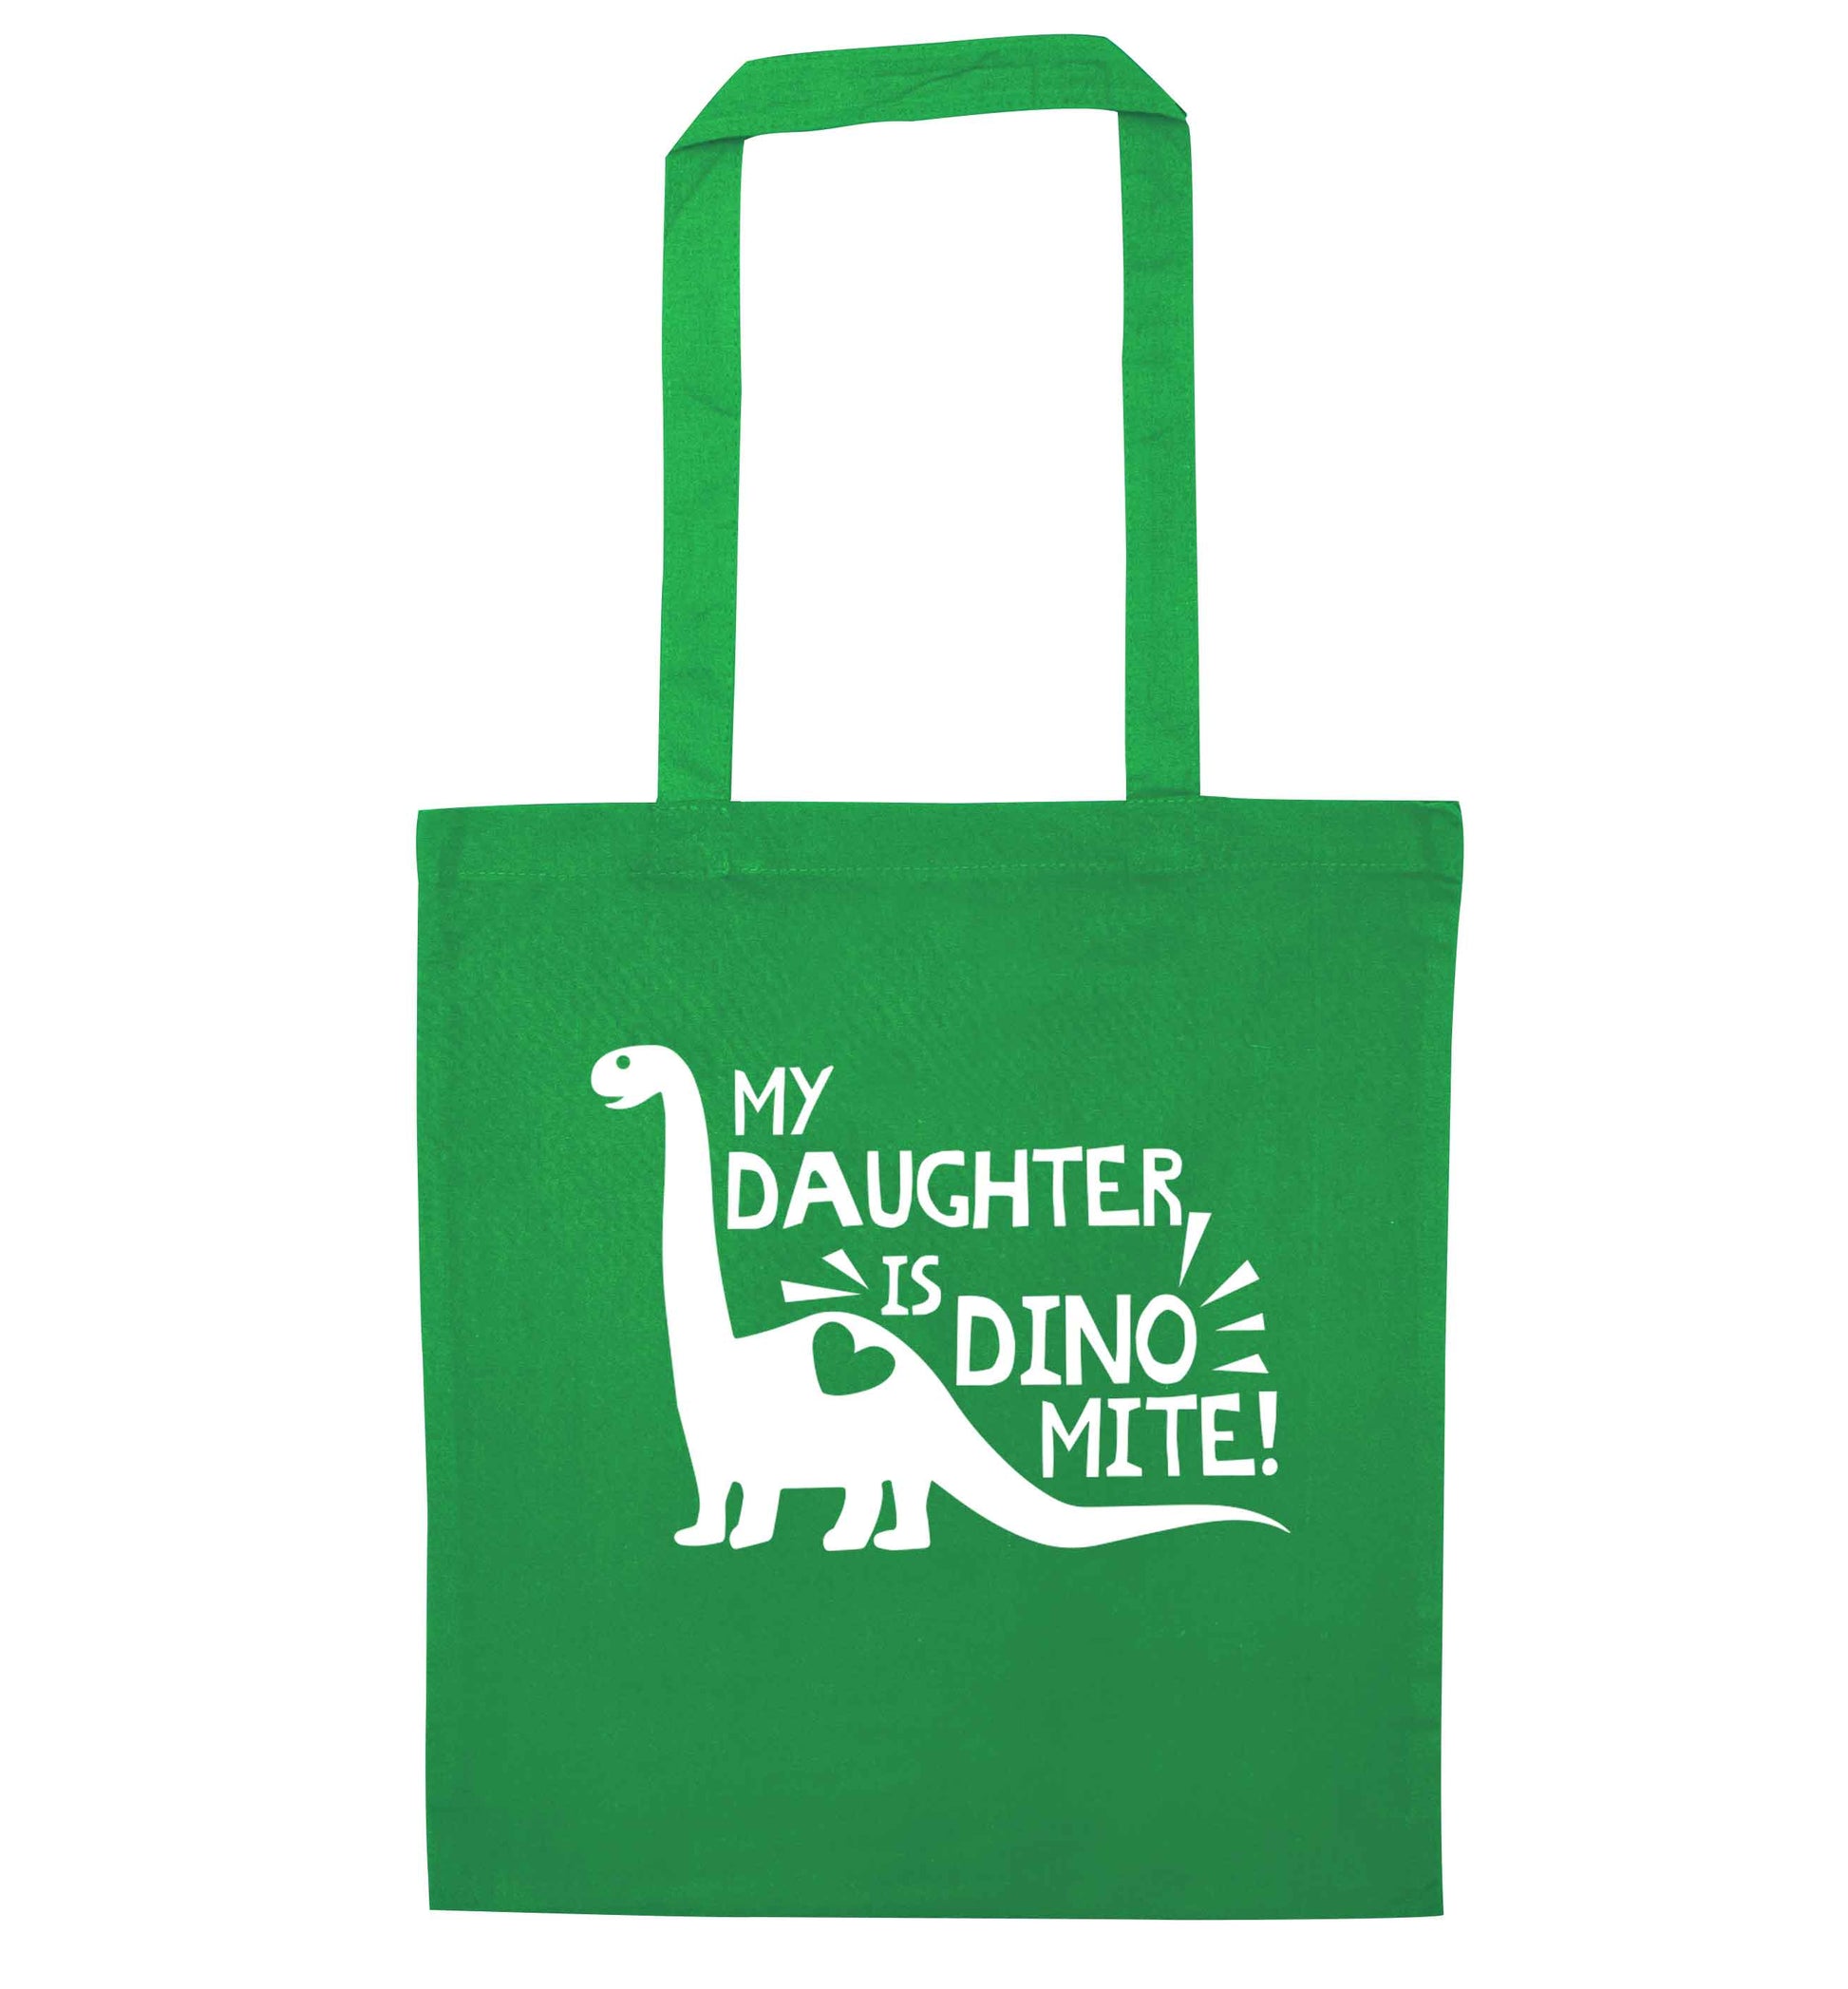 My daughter is dinomite! green tote bag